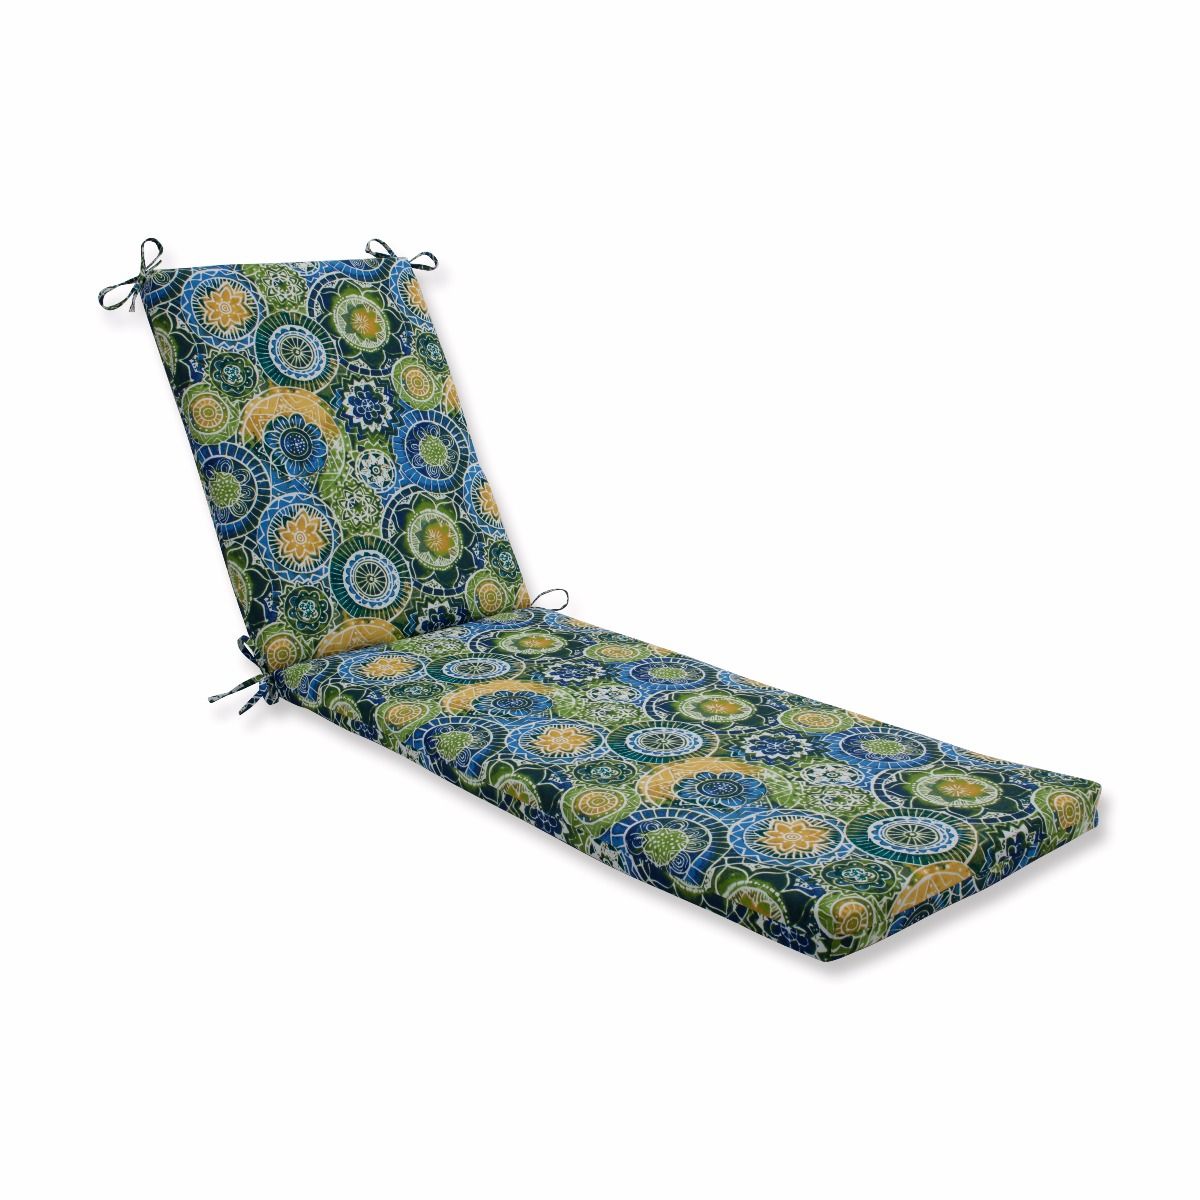 Pillow Perfect 80" Green and Blue Outdoor Patio Chaise Lounge Cushions with Ties